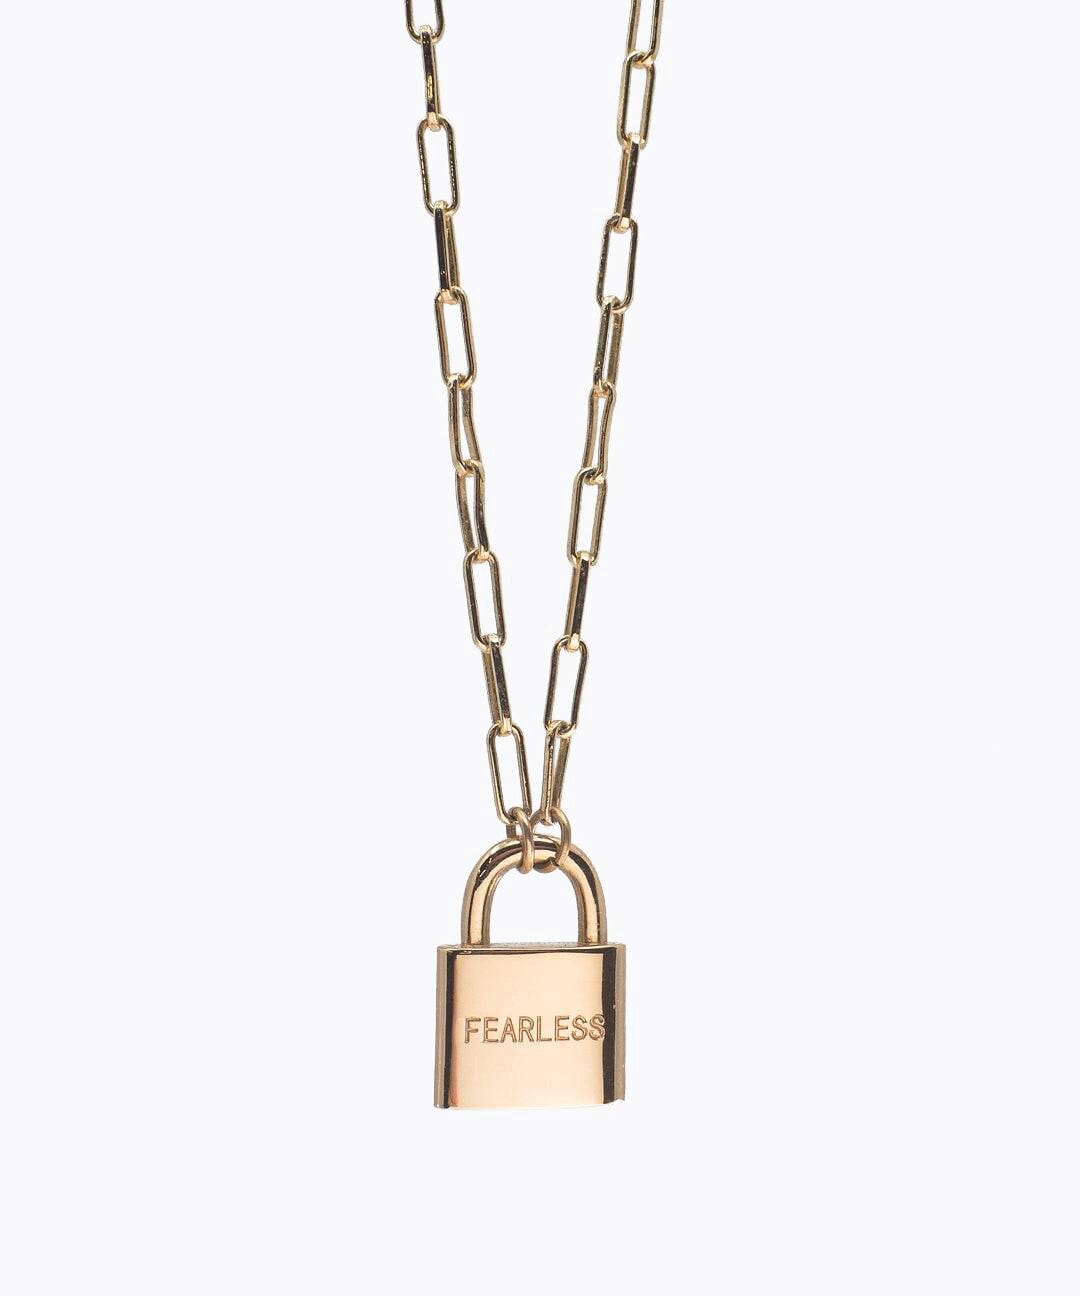 Brooklyn Padlock Necklace Necklaces The Giving Keys FEARLESS GOLD 